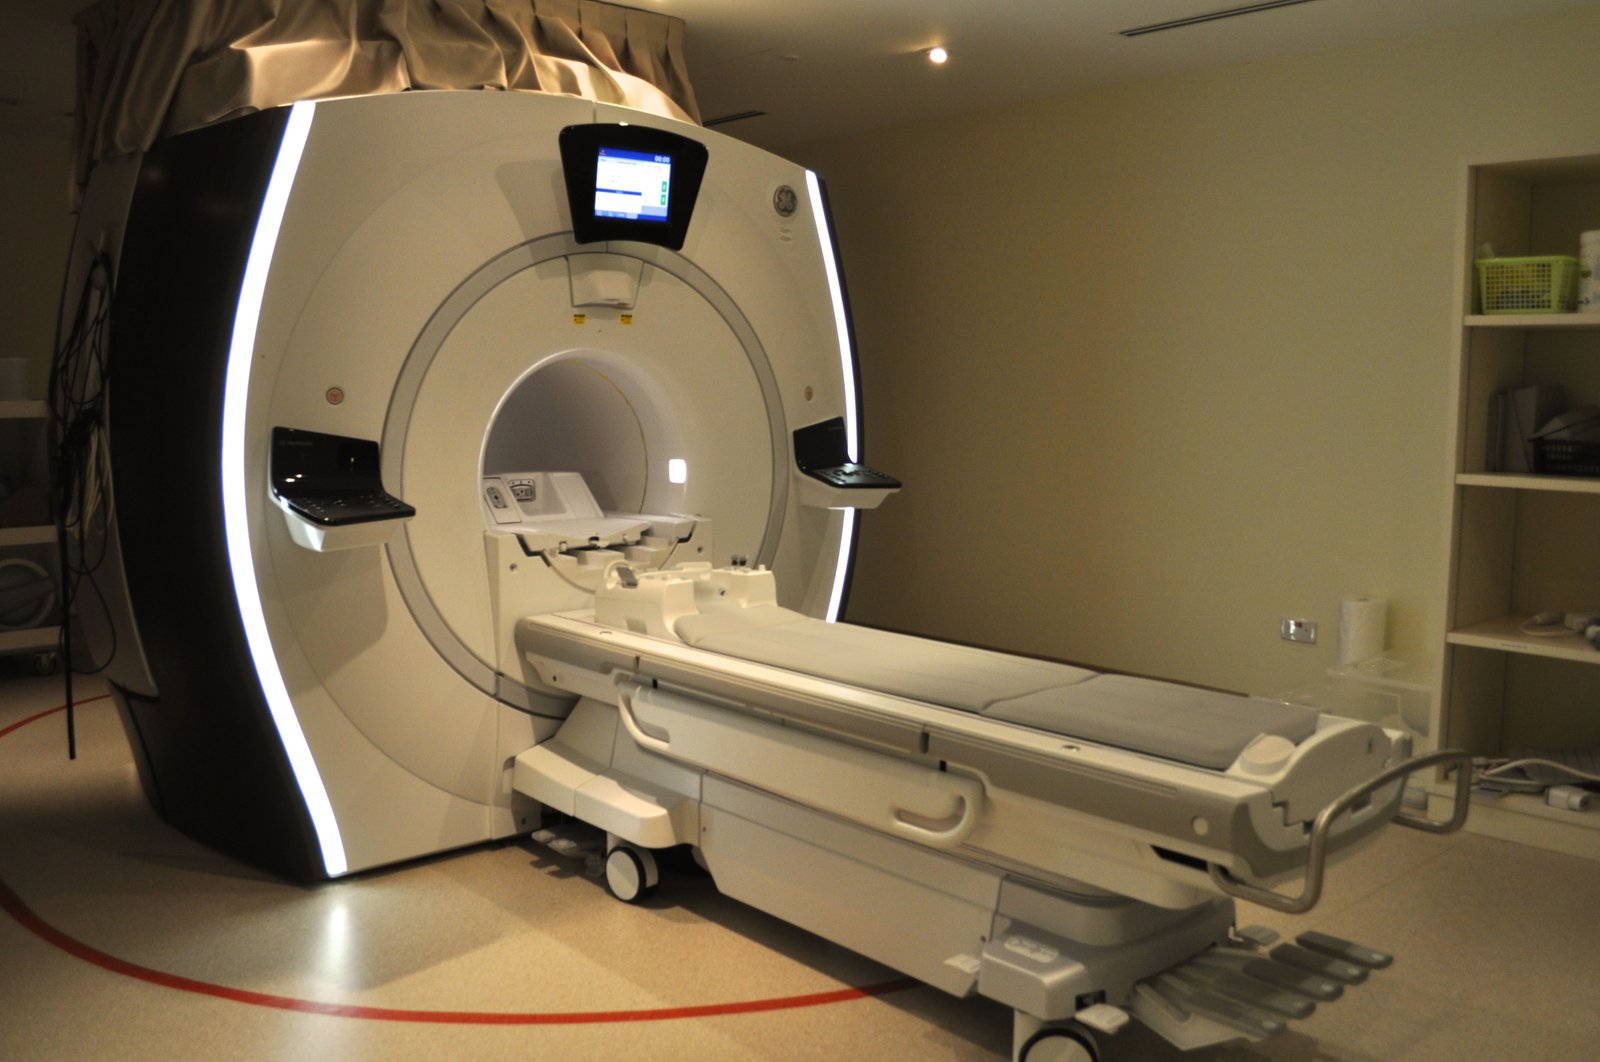 Noise is one of the major complaints from patients who undergo an MRI exam